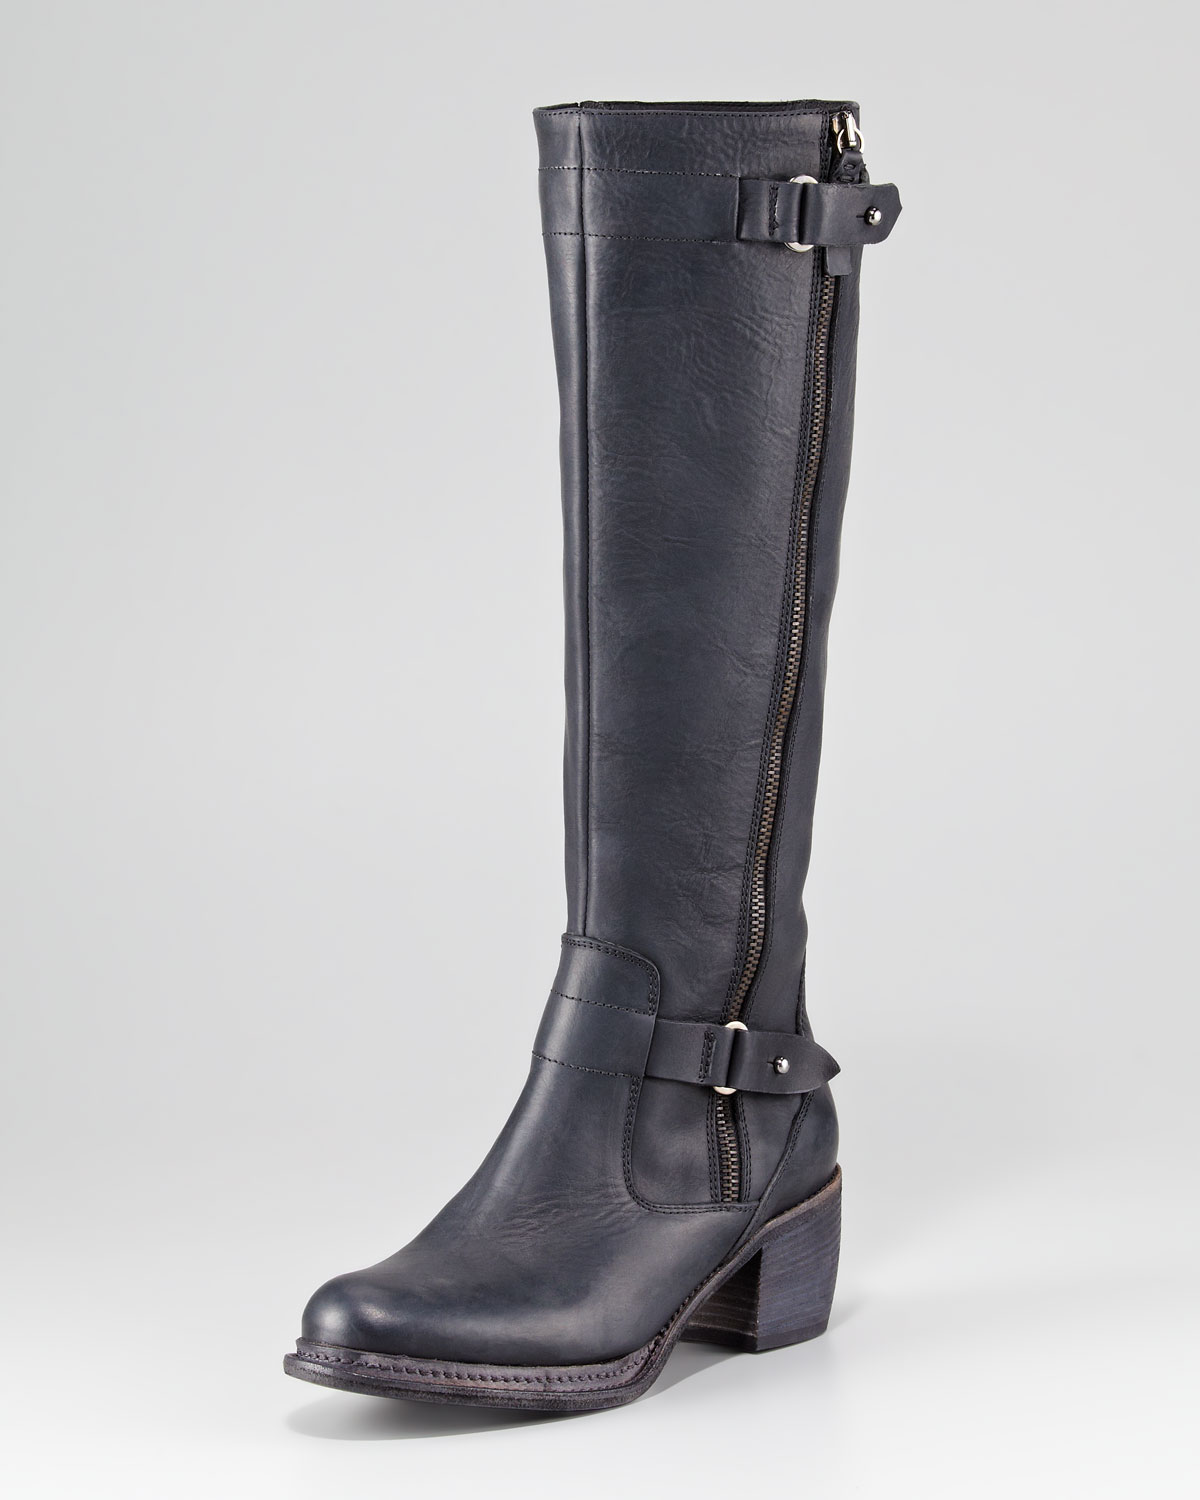 Vera Wang Lavender Nessa Oiled Leather Knee Boot in Black | Lyst